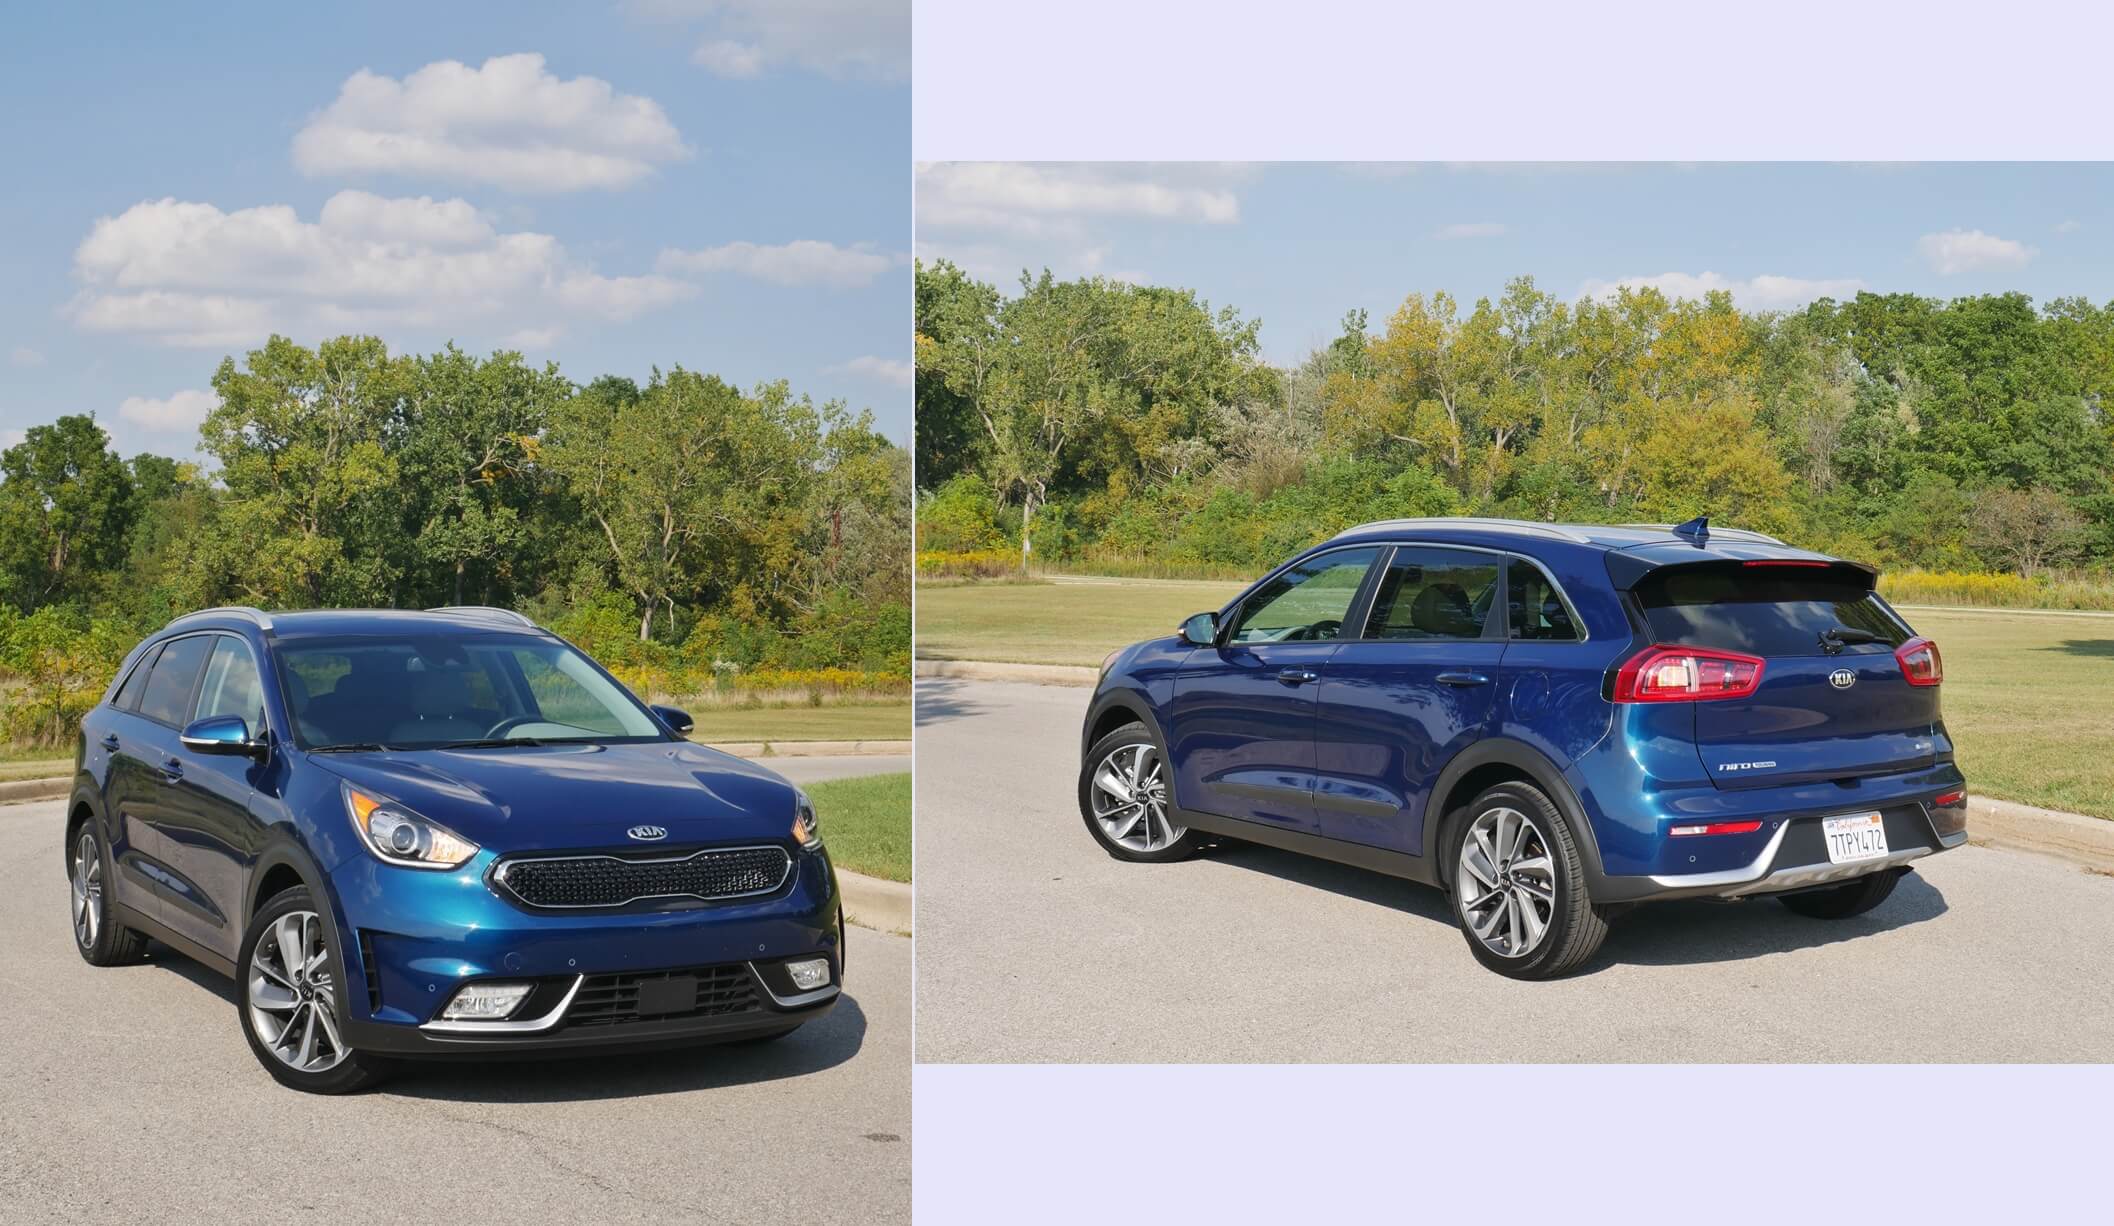 2017 Kia Niro Hybrid Touring: a more conventional silhouette than the typical polarizing ground-up gas-electric hybrid design